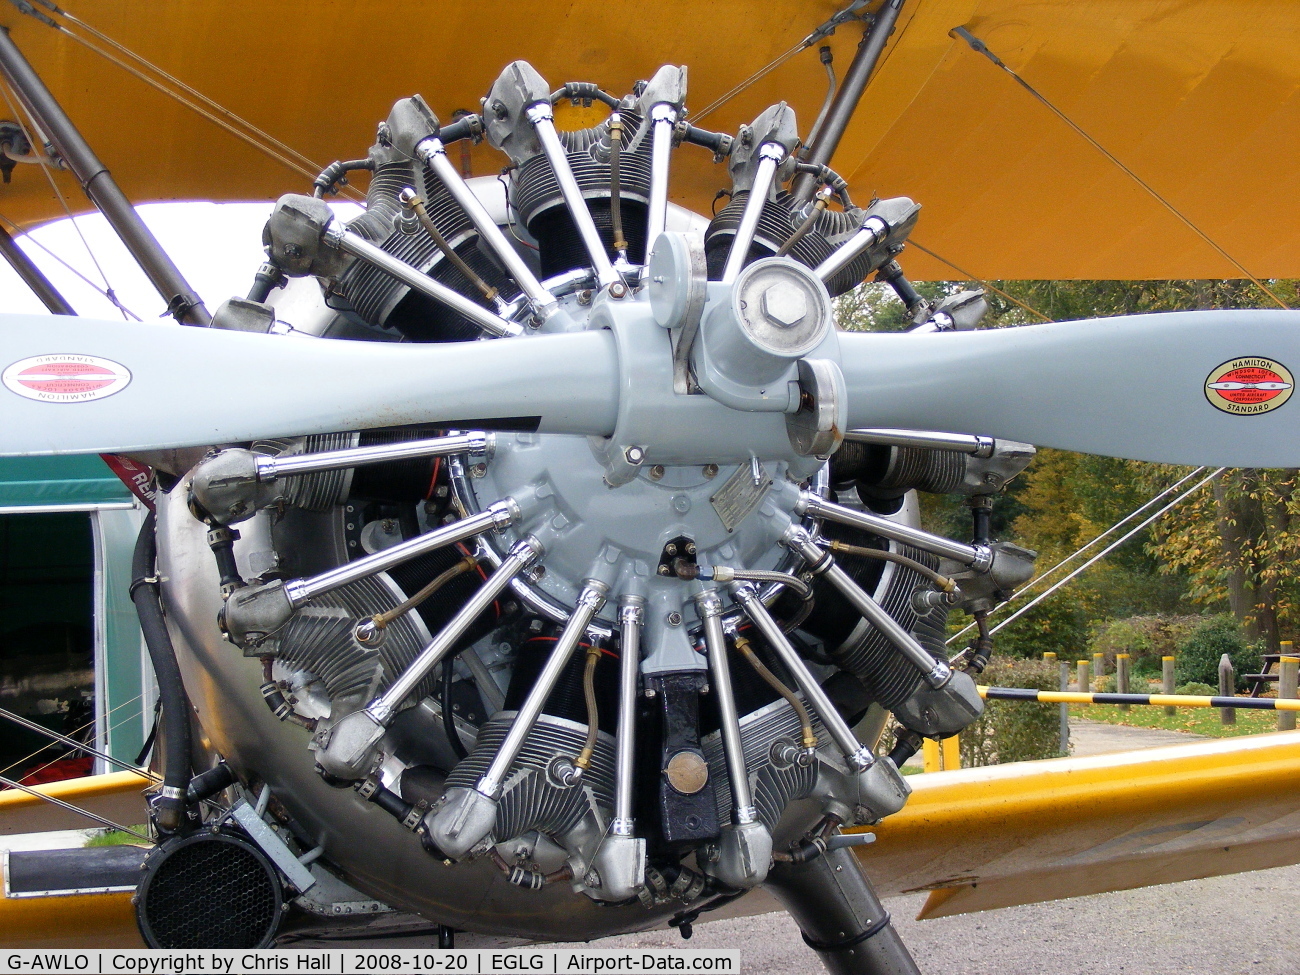 G-AWLO, 1943 Boeing E75 C/N 75-5563, Great looking radial engine